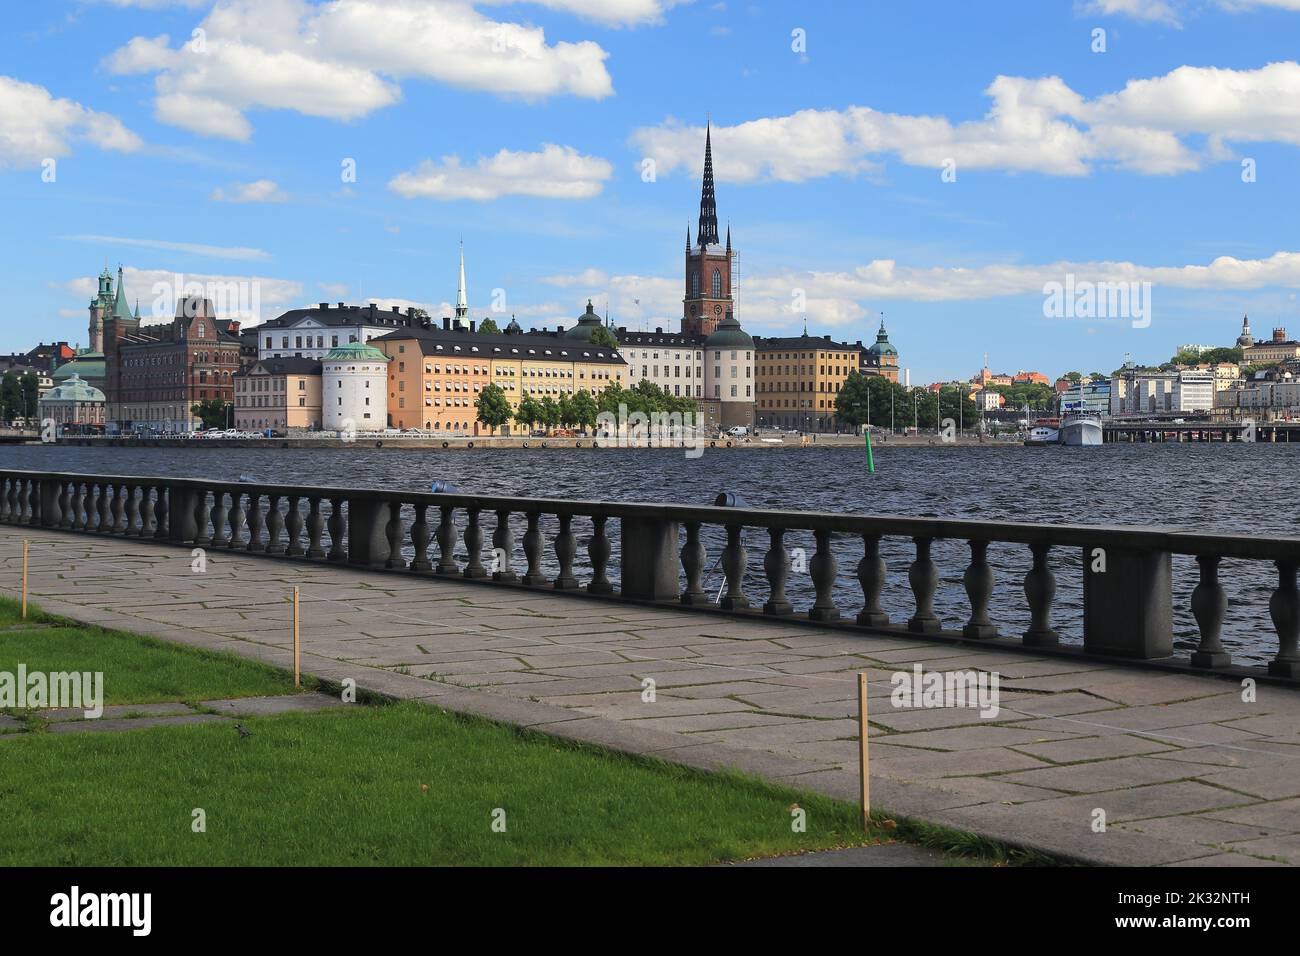 STOCKHOLM, SWEDEN - JUNE 27, 2016: This is view of the island Riddarholmen located on Lake Malaren, which is part of  Gamla Stan. Stock Photo